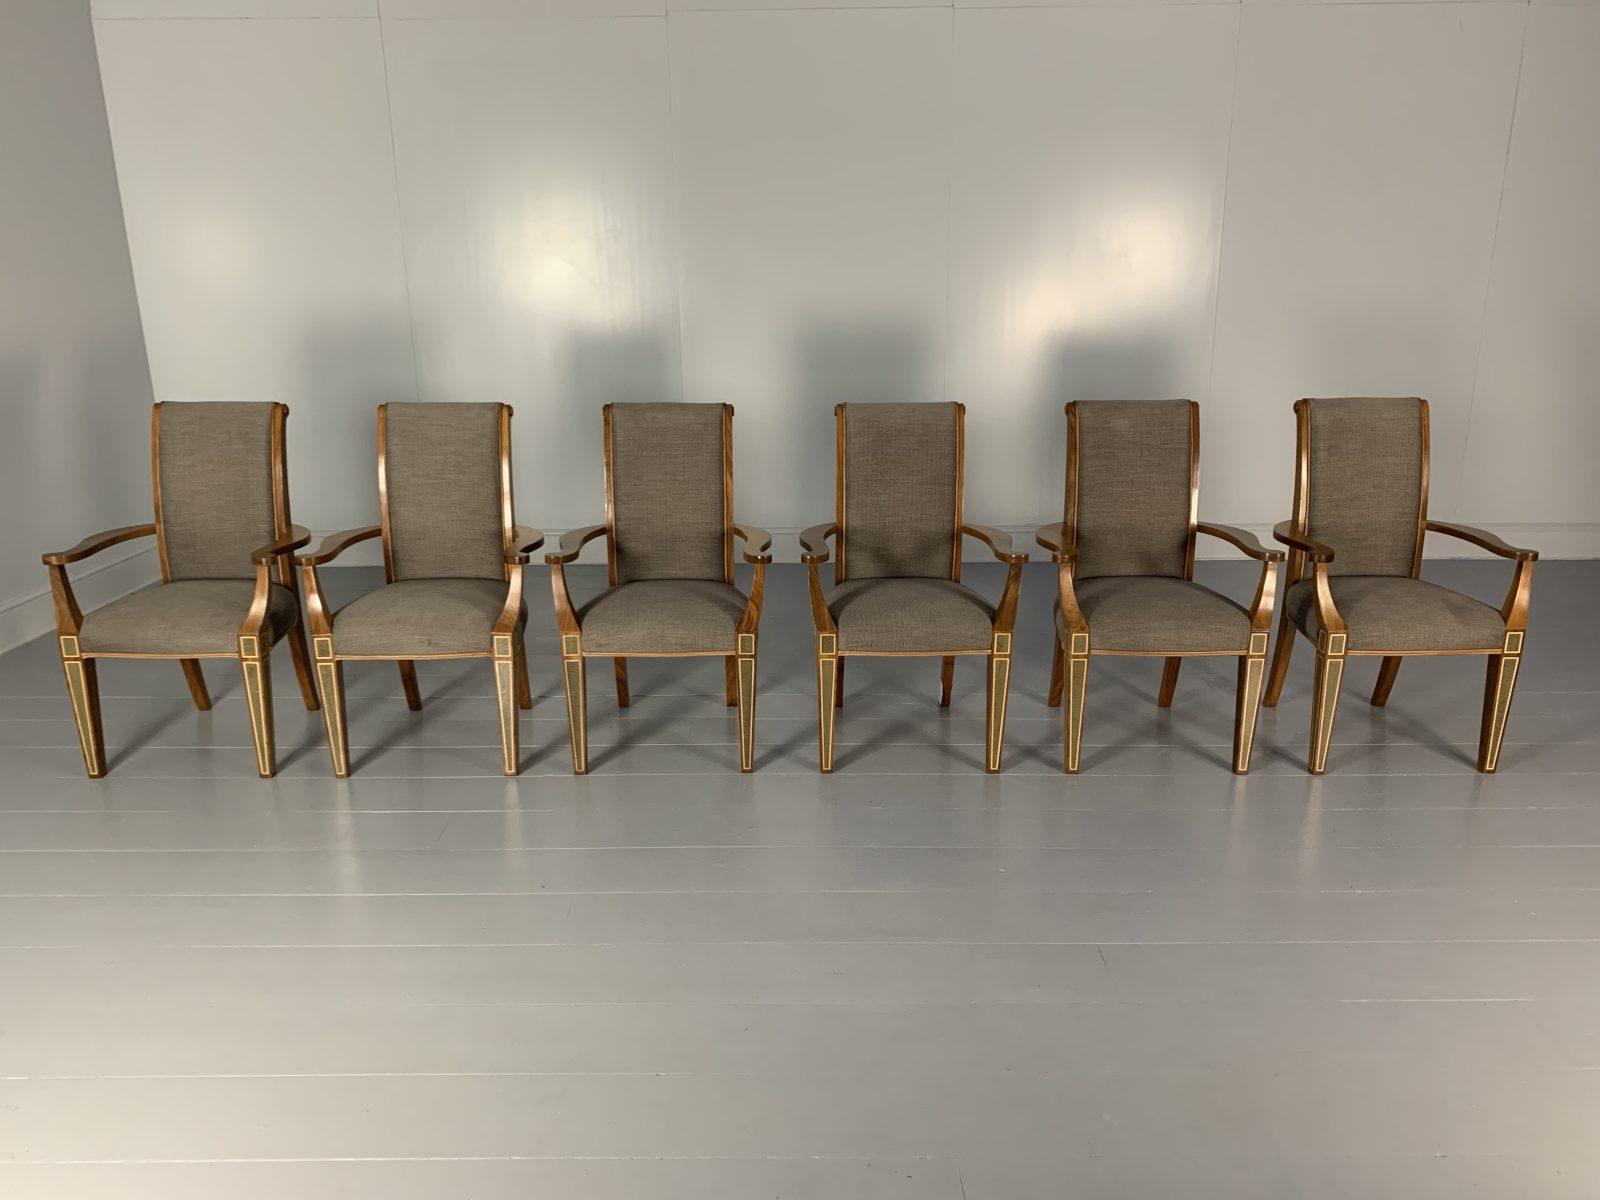 Hello Friends, and welcome to another unmissable offering from Lord Browns Furniture, the UK’s premier resource for fine Sofas and Chairs.

On offer on this occasion is a superb suite of 6 David Linley “Classic Carver Dining” Chairs with inlaid